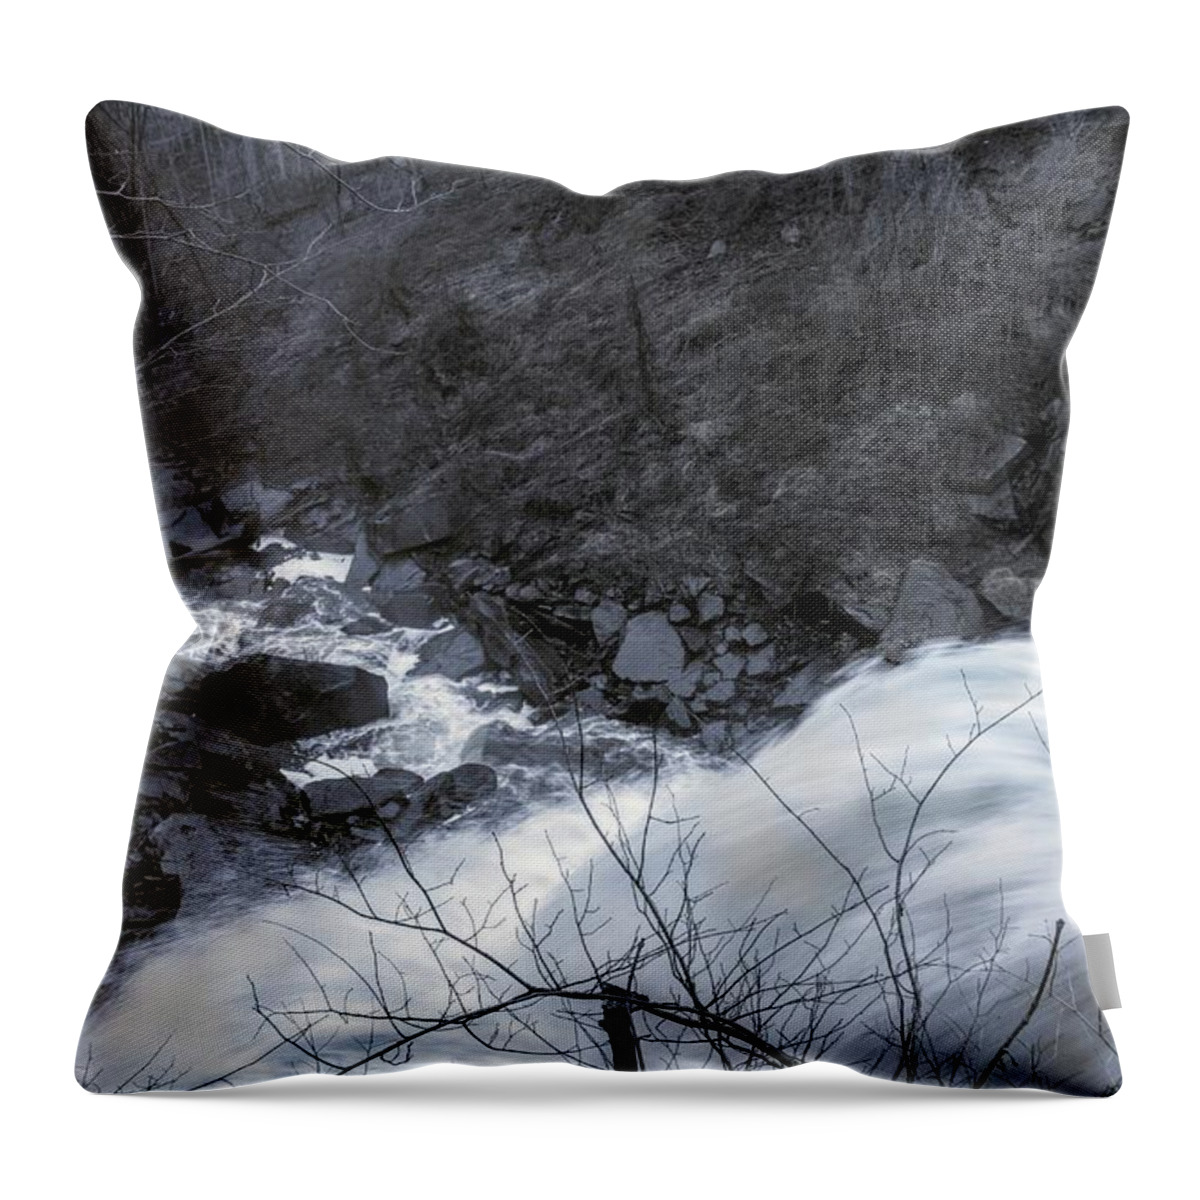  Throw Pillow featuring the photograph Brandywine Falls #10 by Brad Nellis